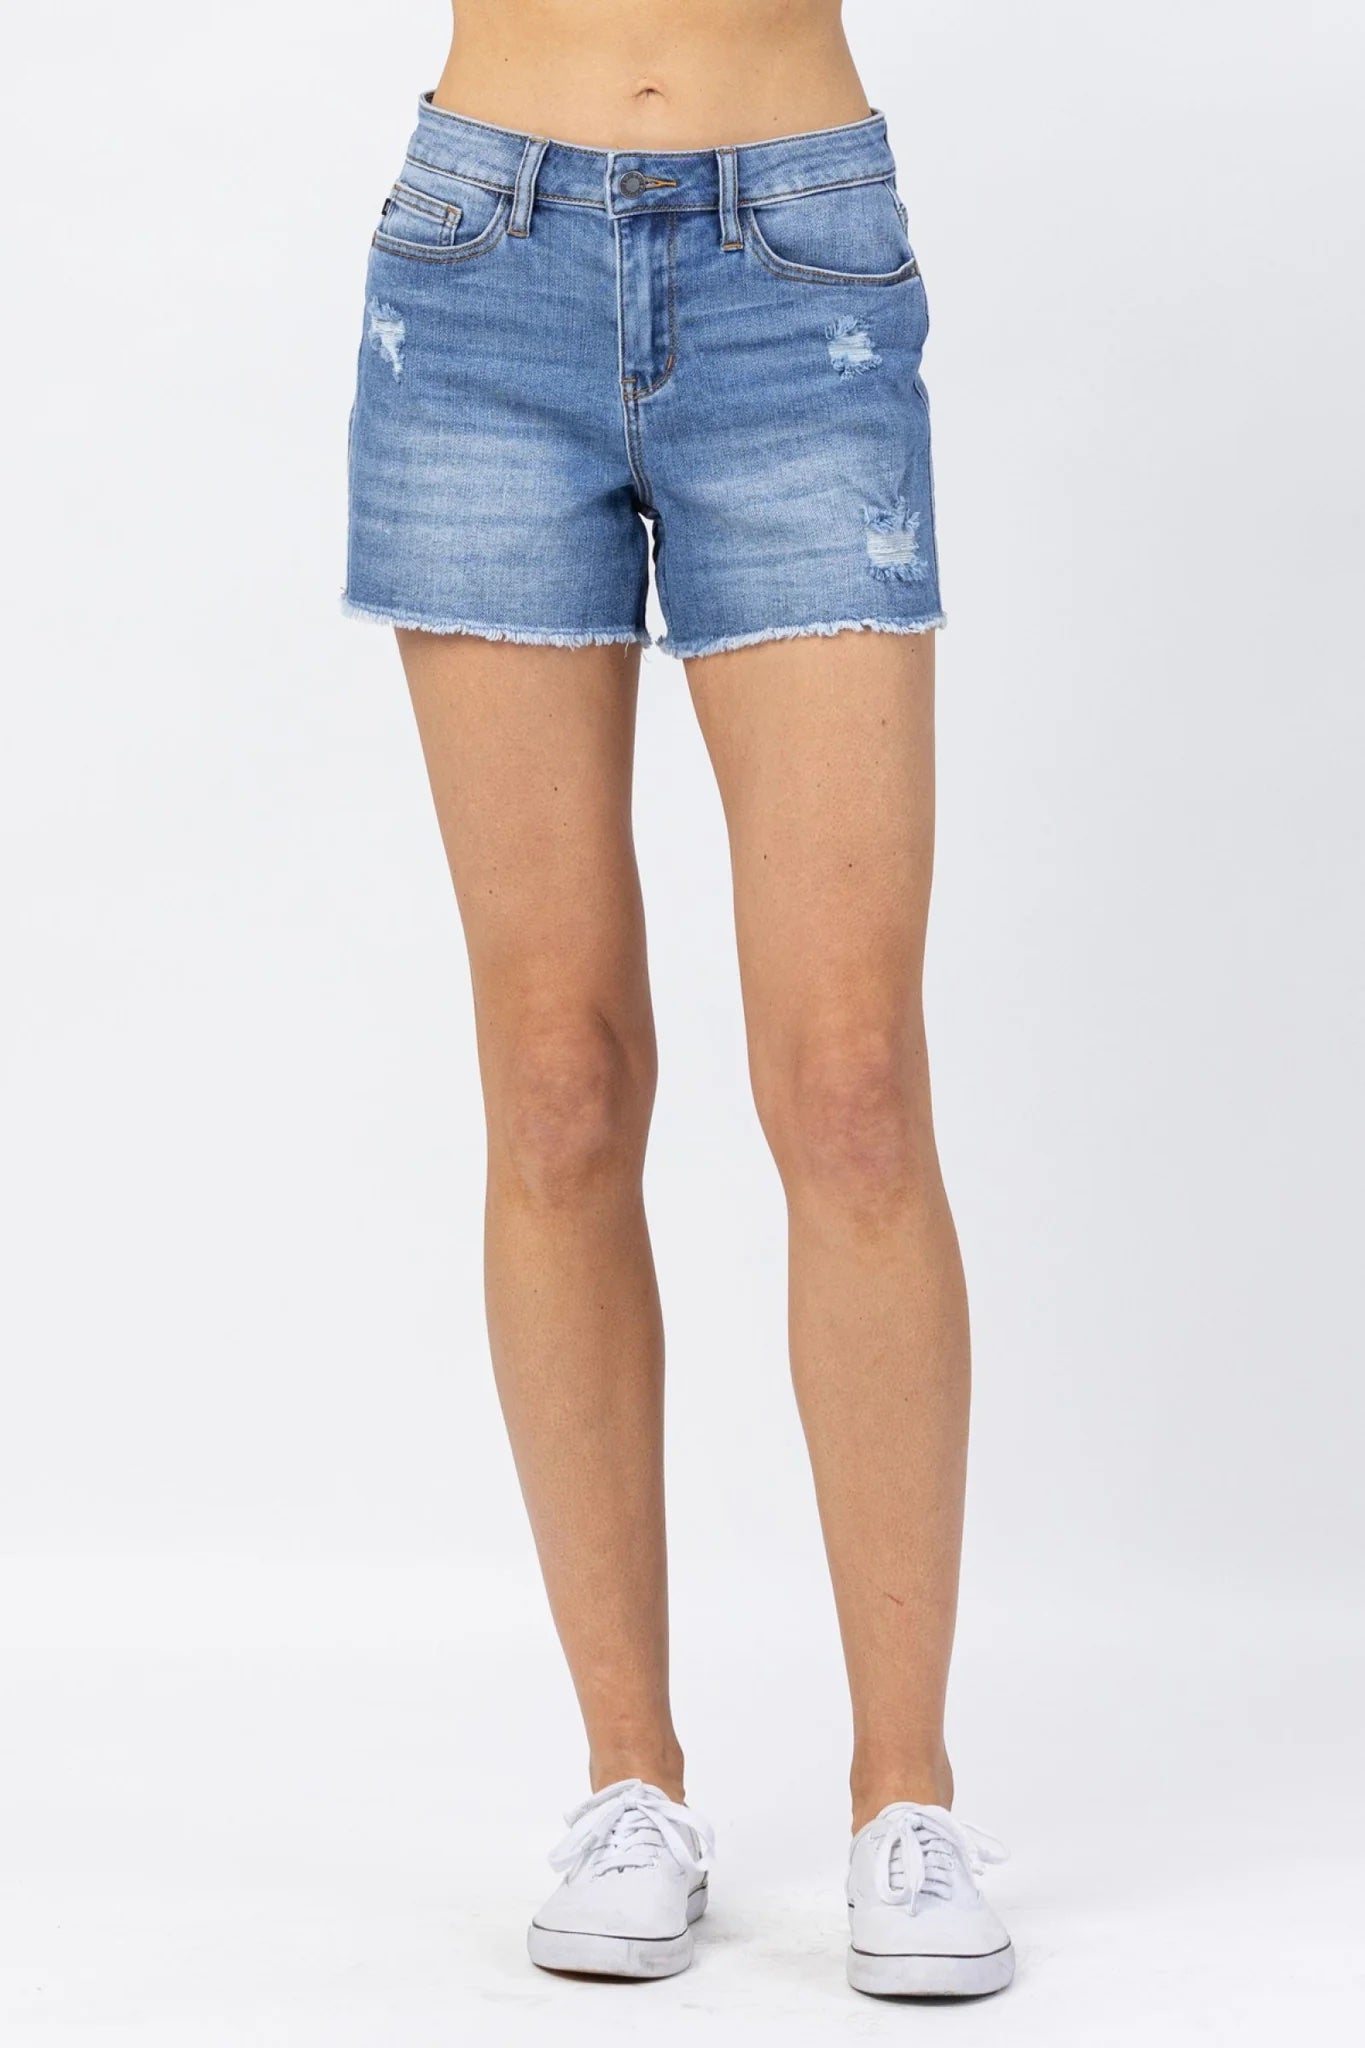 Women's Shorts Judy Blue Shorts Denim Shorts Styled by Steph Online Boutique Granger, IN